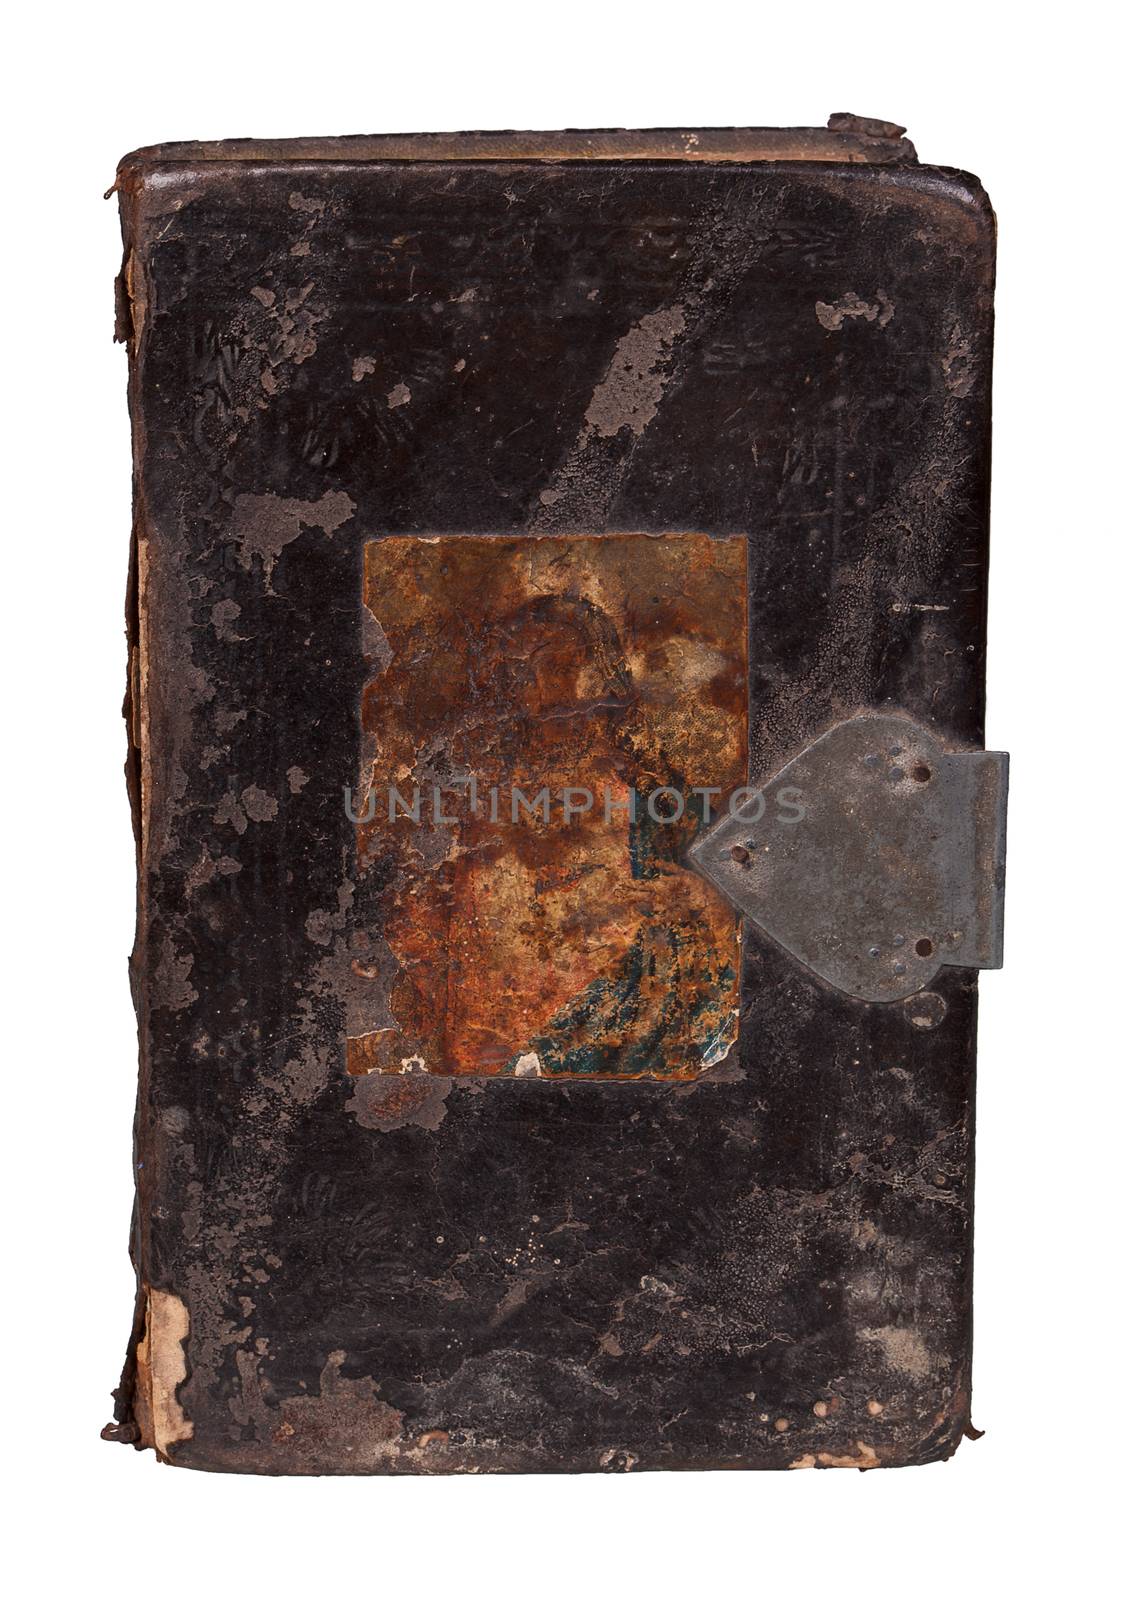 Old antique leather book isolated on white background. Bible.